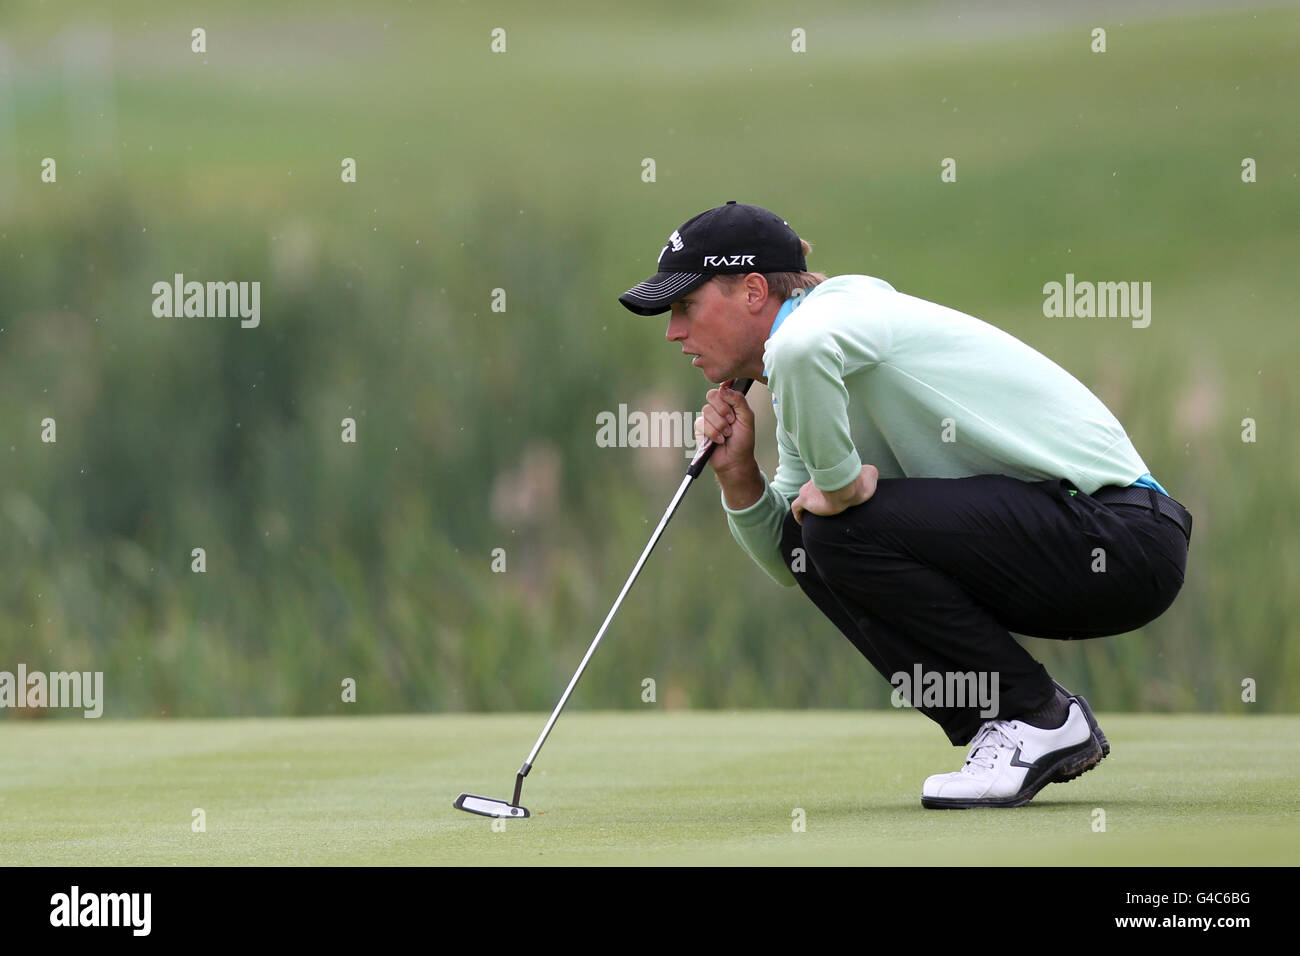 Sweden's Alexander Noren lines up a putt during day four of the Saab Wales Open 2011 at the Celtic Manor Resort, Newport. Stock Photo